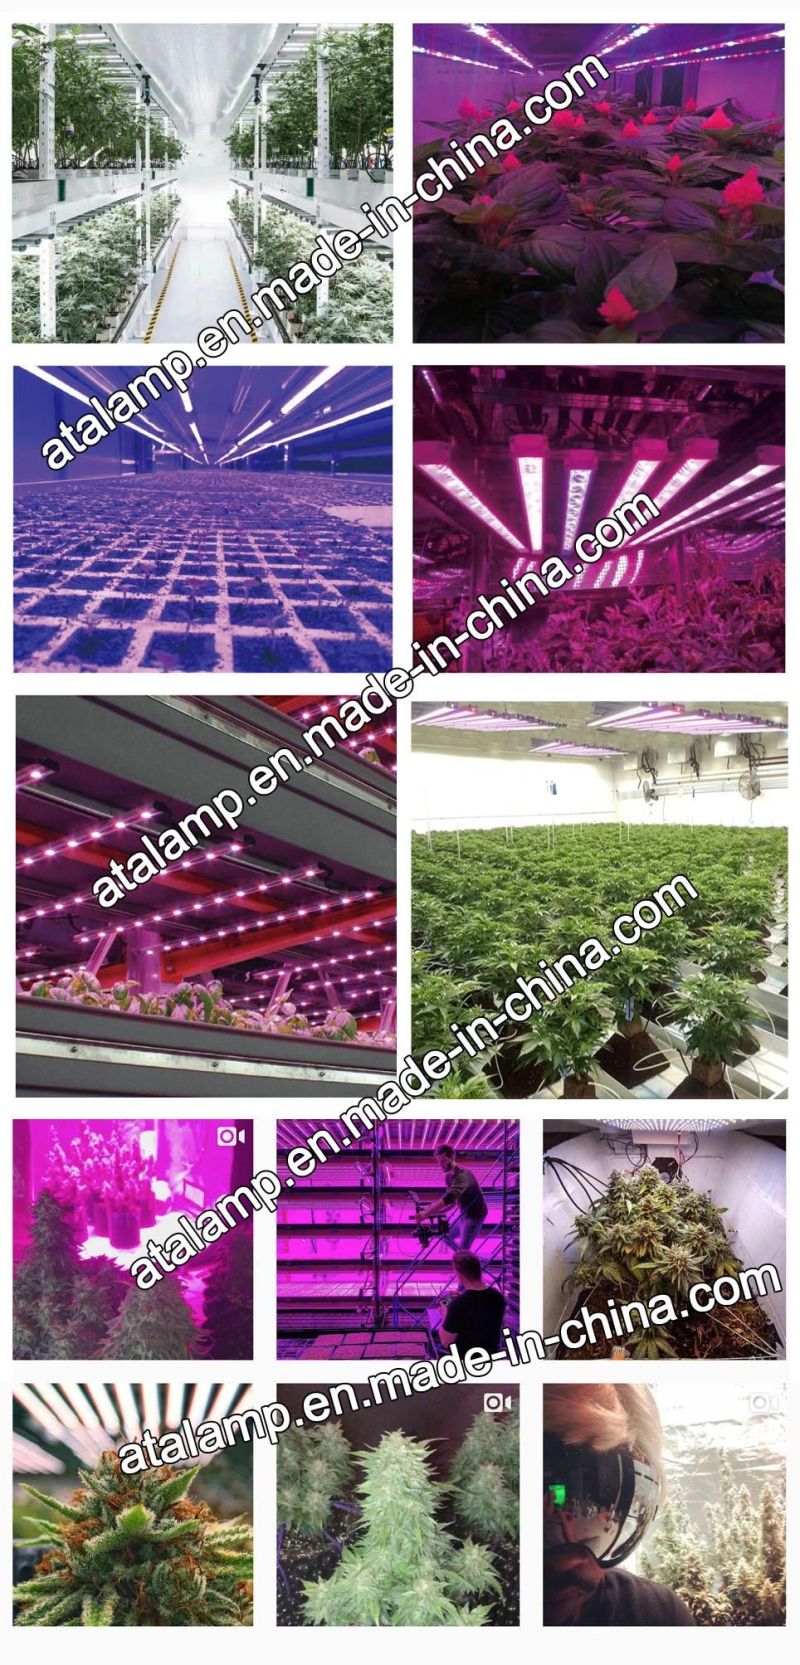 2018 Upgraded LED Grow Light with 2 Gardening Pots, 360 Degree Adjustable Arm, Sensitive Touch Control for Home Indoor